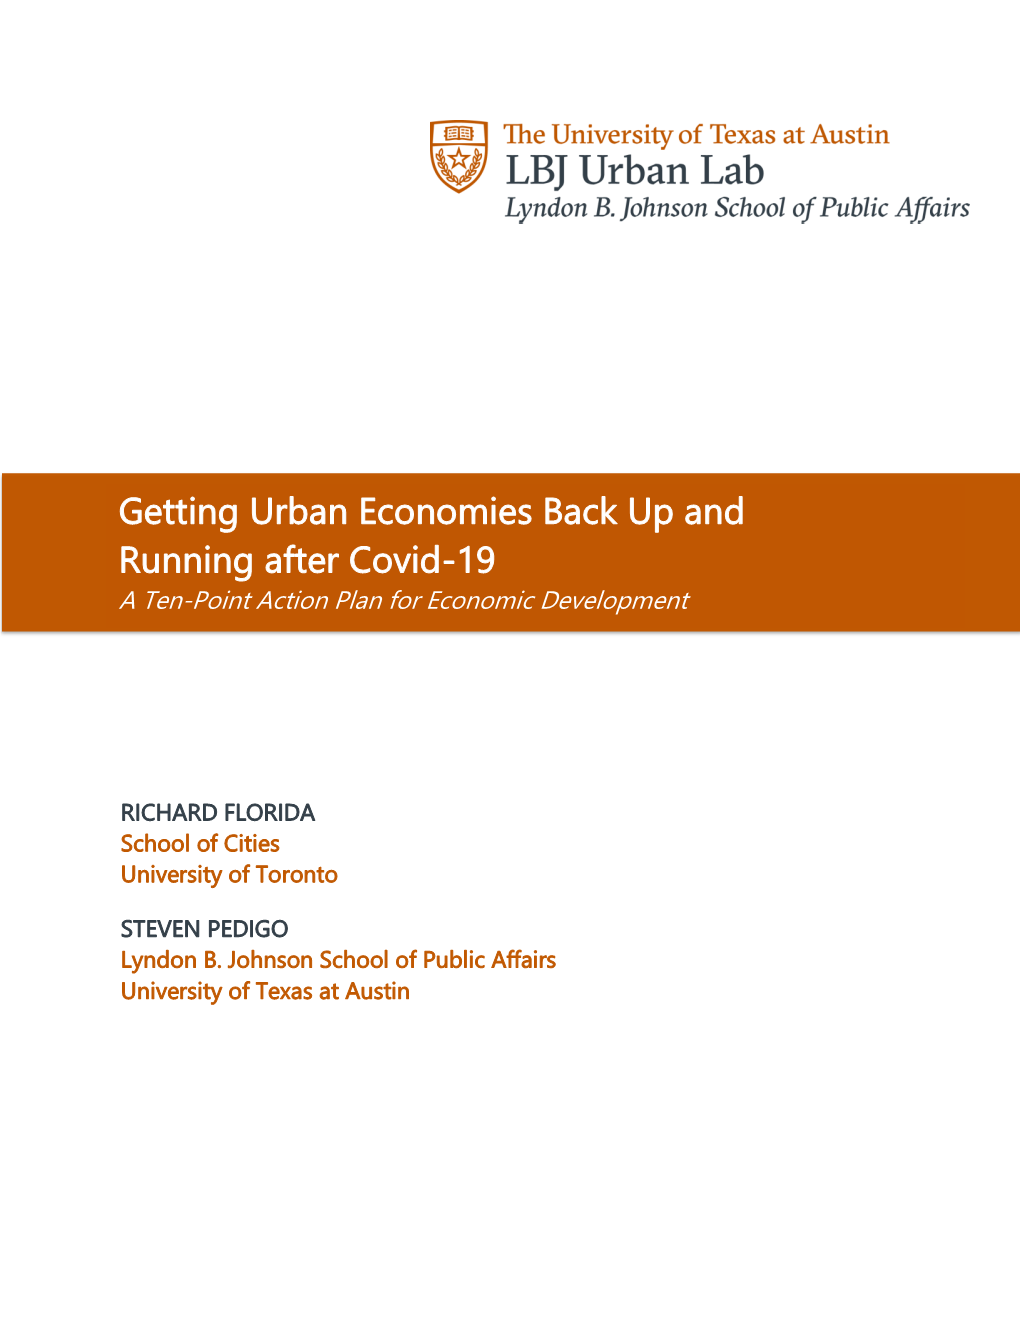 Getting Urban Economies Back up and Running After Covid-19 a Ten-Point Action Plan for Economic Development